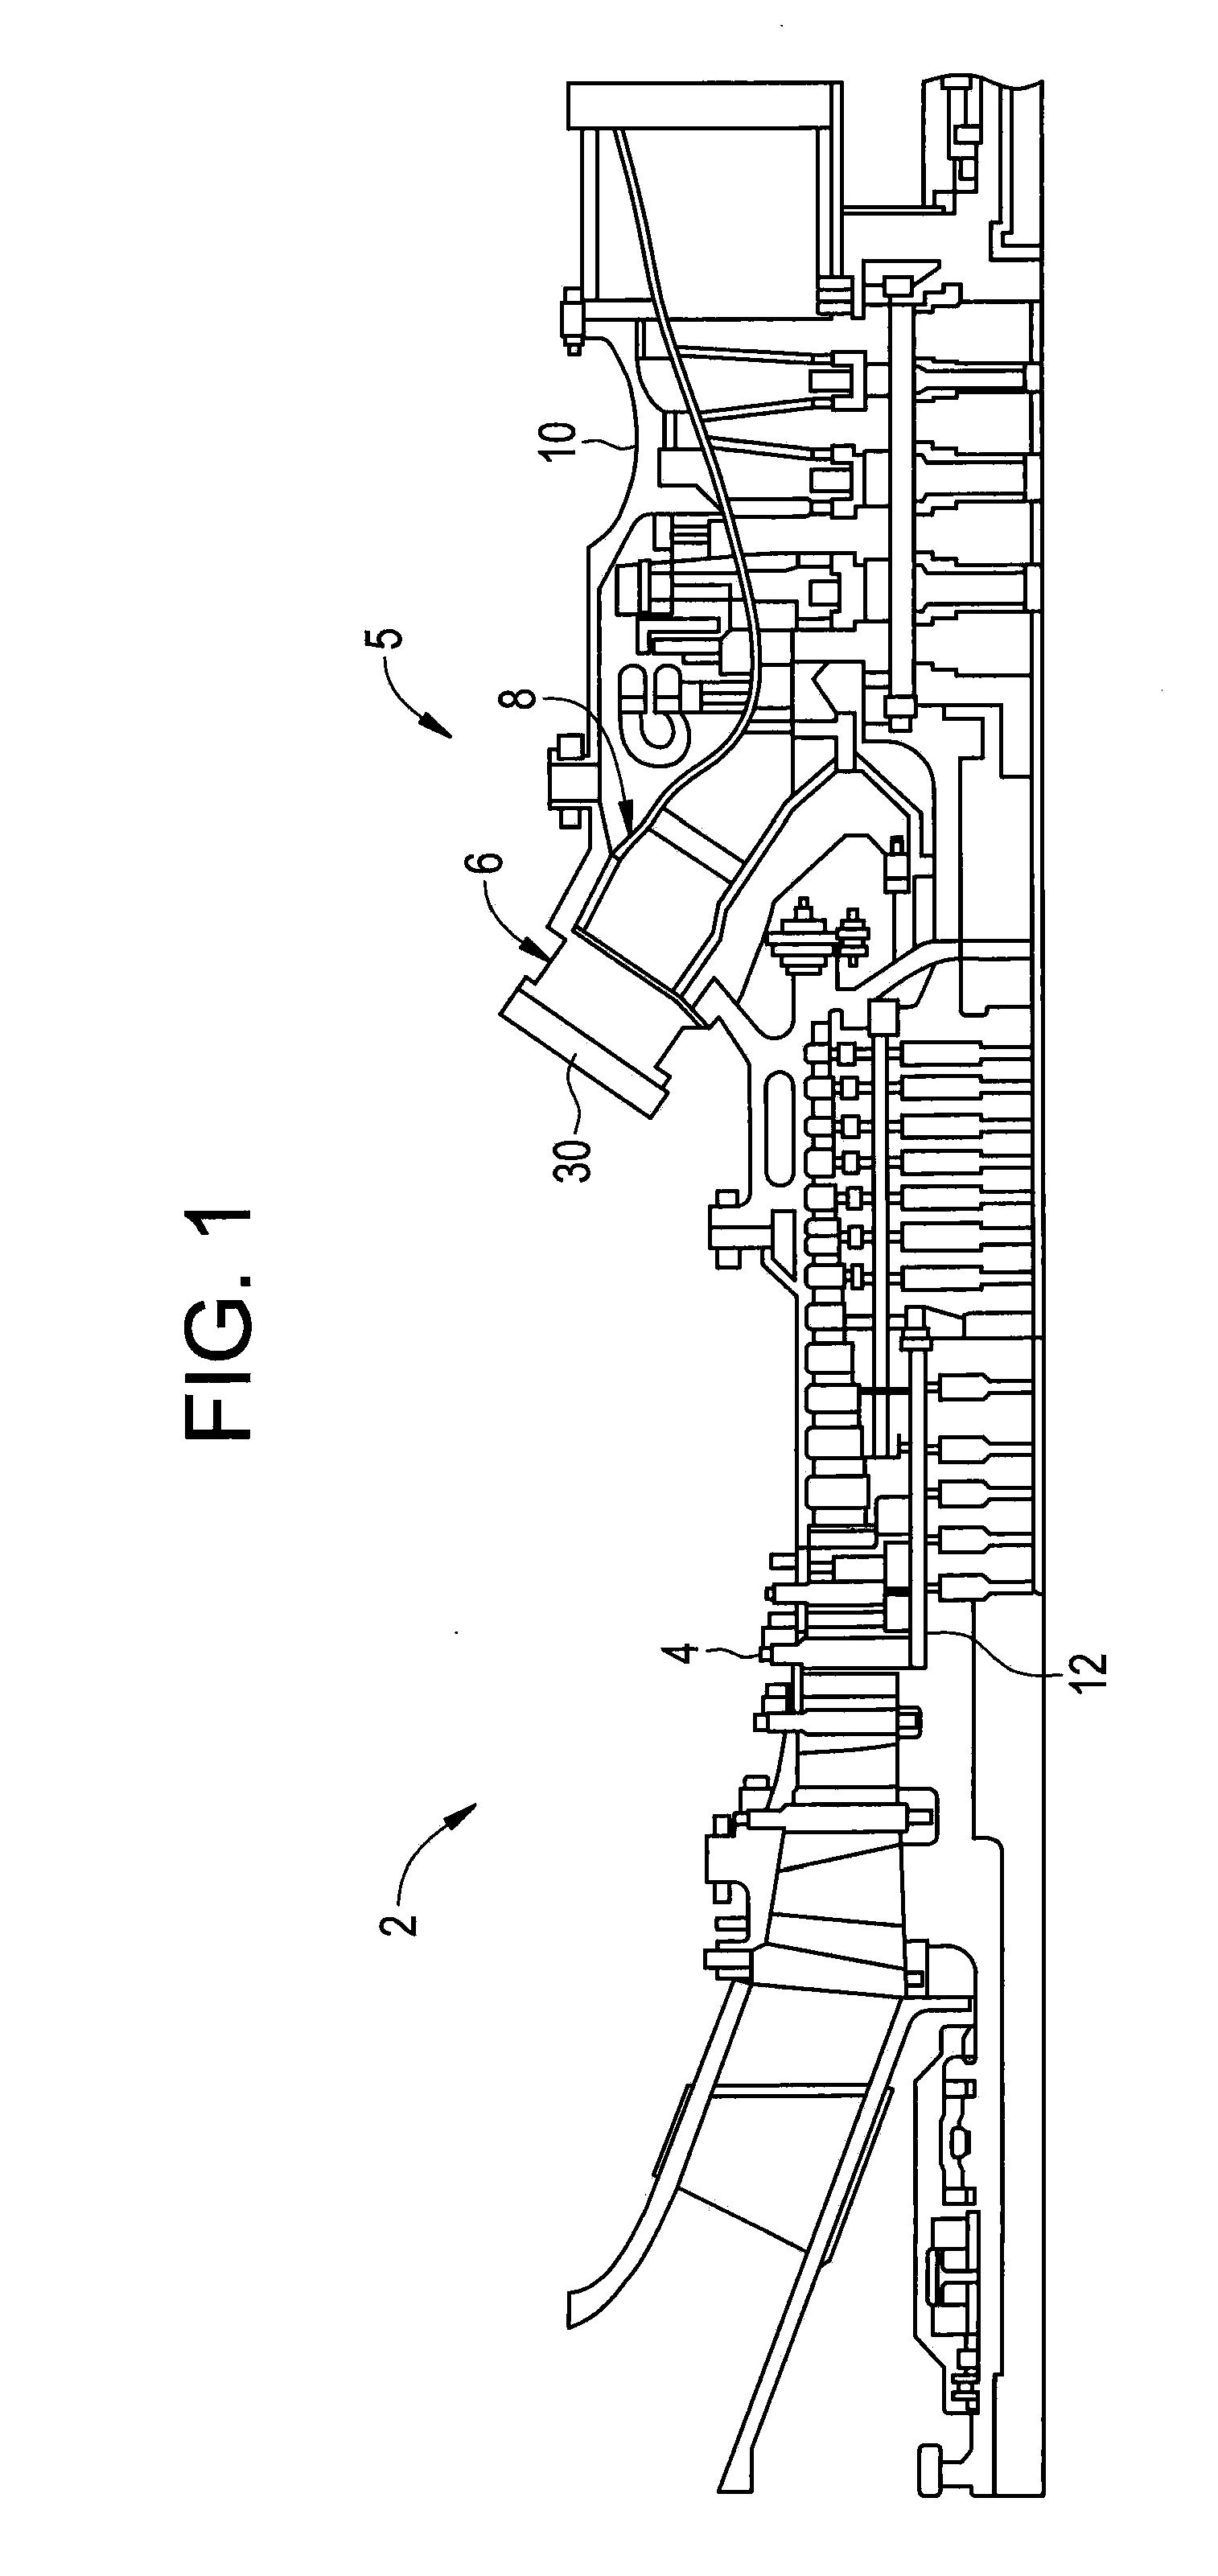 System and method for suppressing combustion instability in a turbomachine